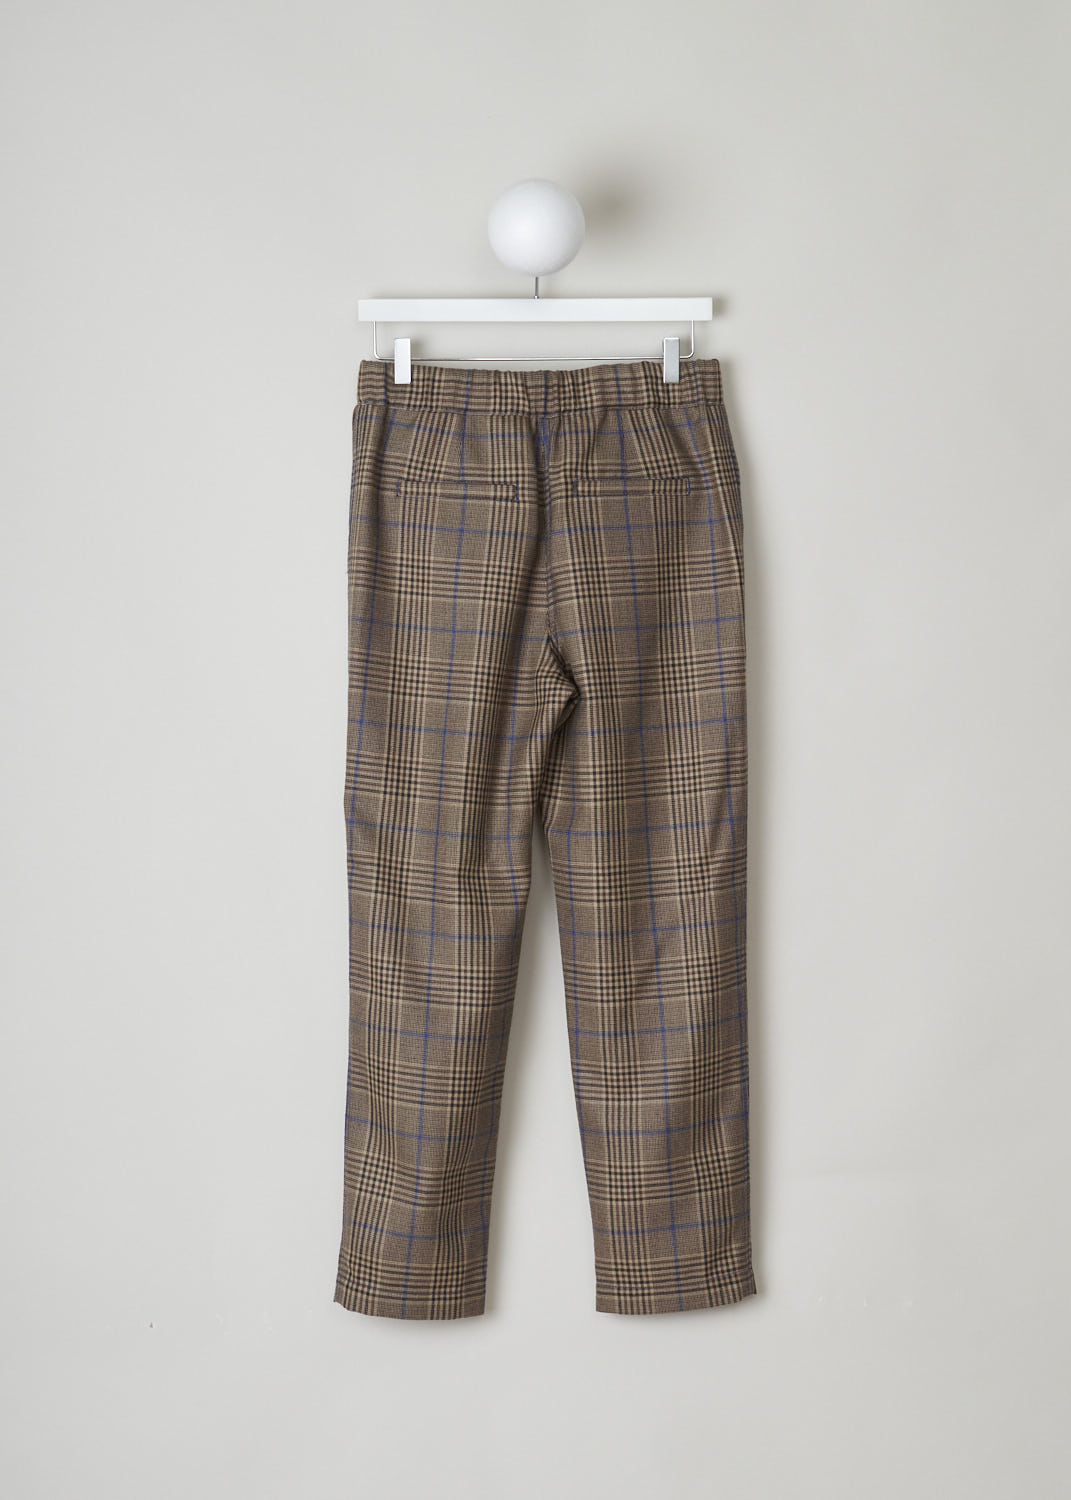 BRUNELLO CUCINELLI, WOOL CHECKED PANTS WITH BLUE THREADING, MA111P6823_C2373, Brown, Back, These brown checkered wool trousers feature an elasticated waistband with a built-in belt in the same checkered fabric. The belt has a black rectangular clasp. These trousers have slanted pockets and a pleated front and slightly tapered pant legs. In the back, two welt pockets can be found. 
